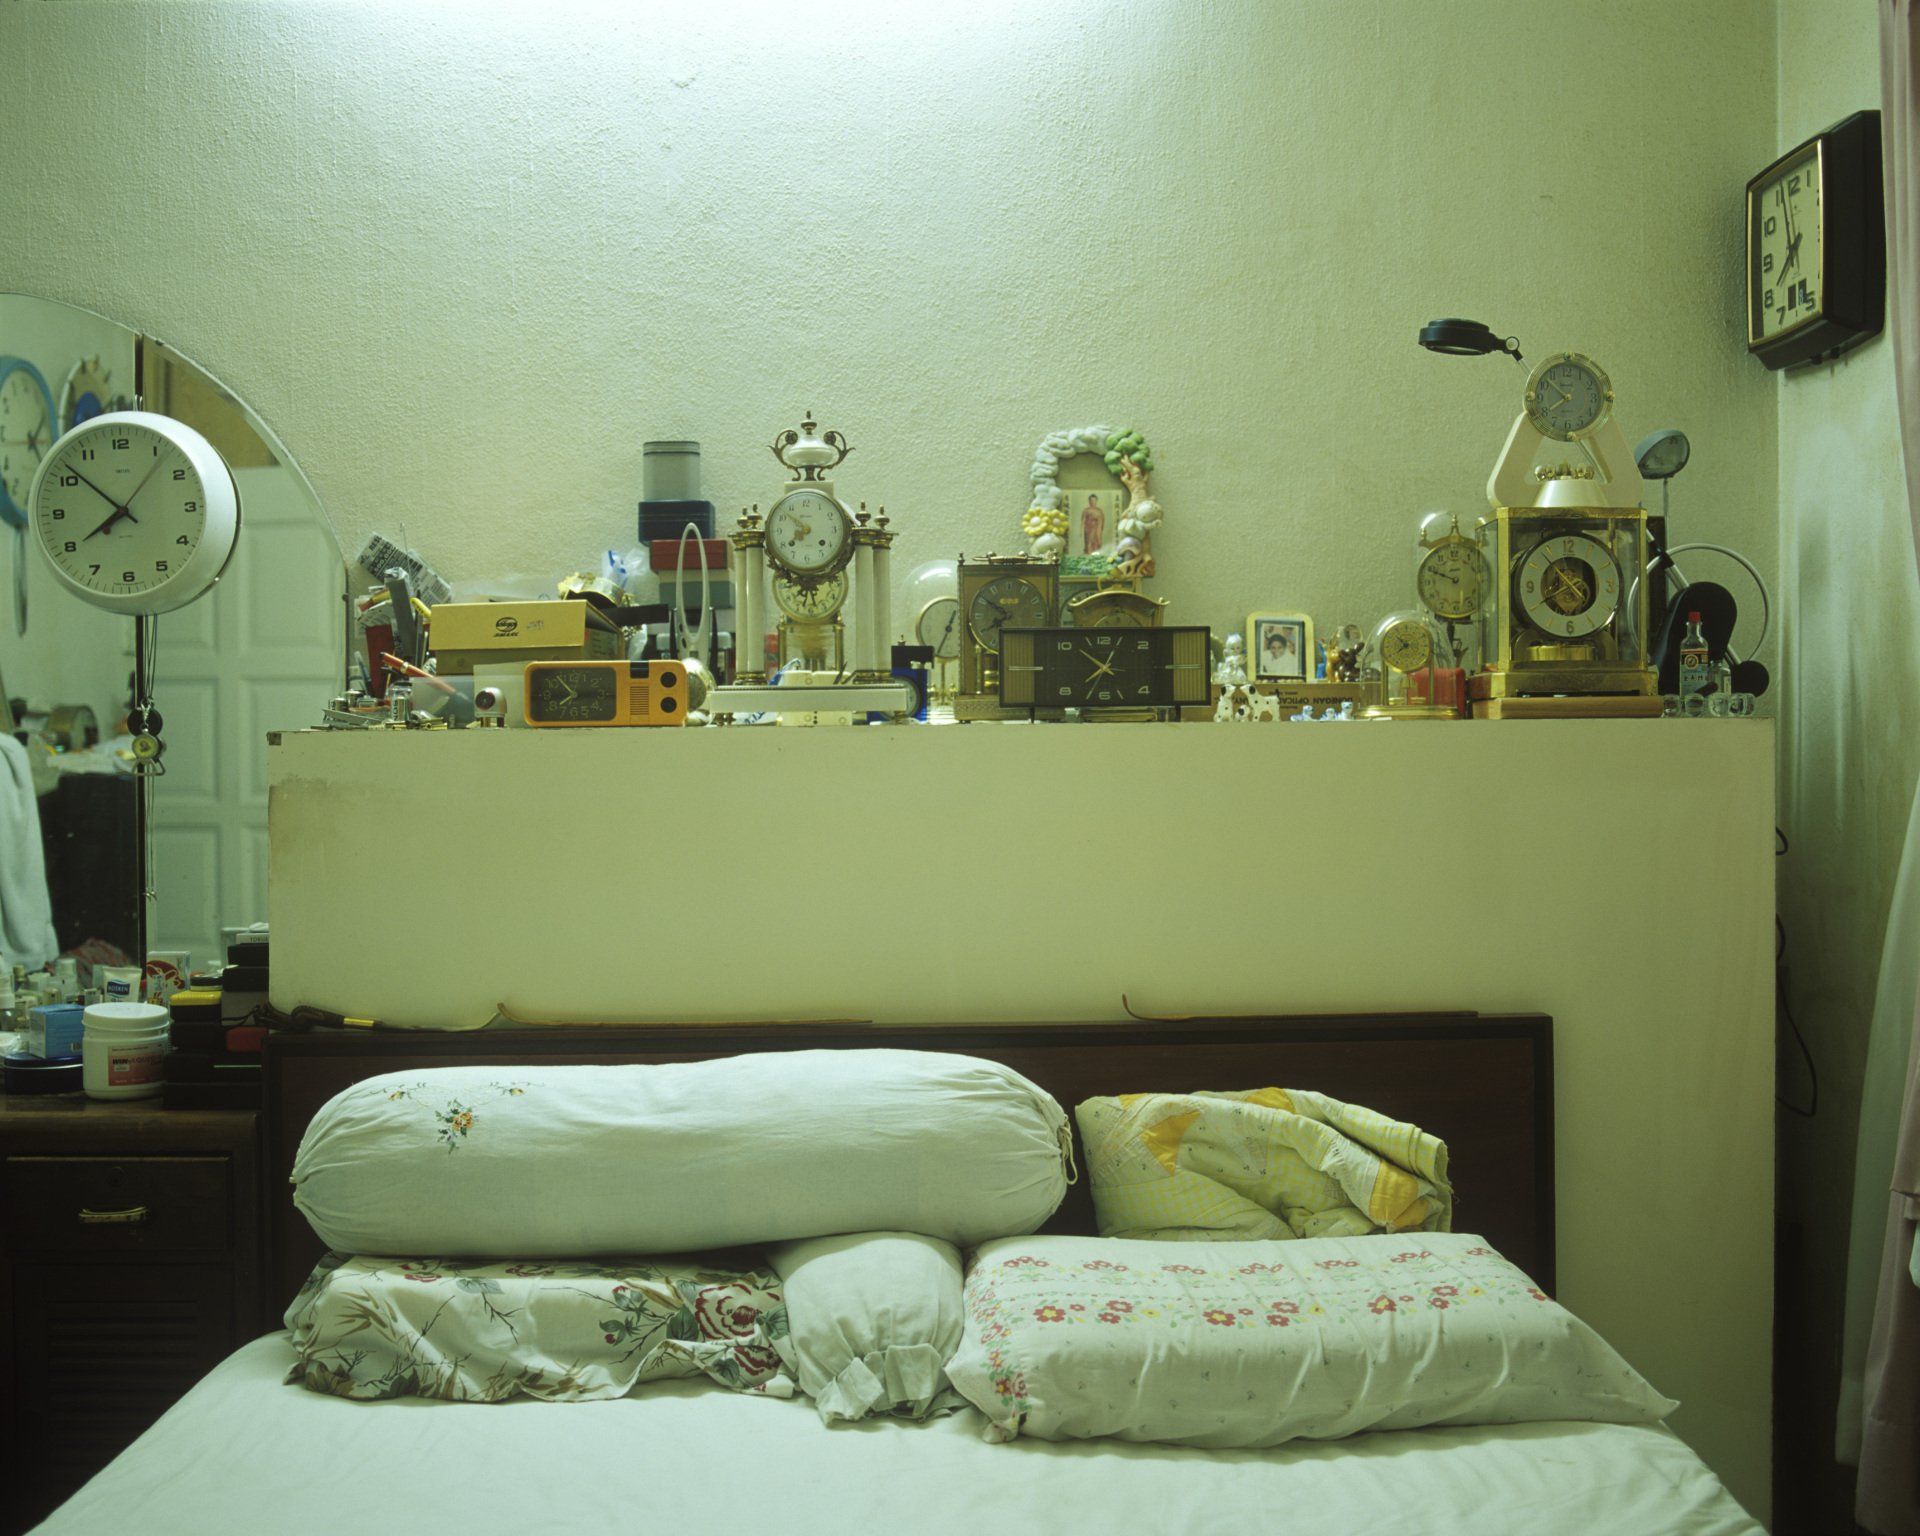 “Eldest Aunt’s Bedroom”, from the project “Convergence,”  Penang, Malaysia, 2010. 56x70cm